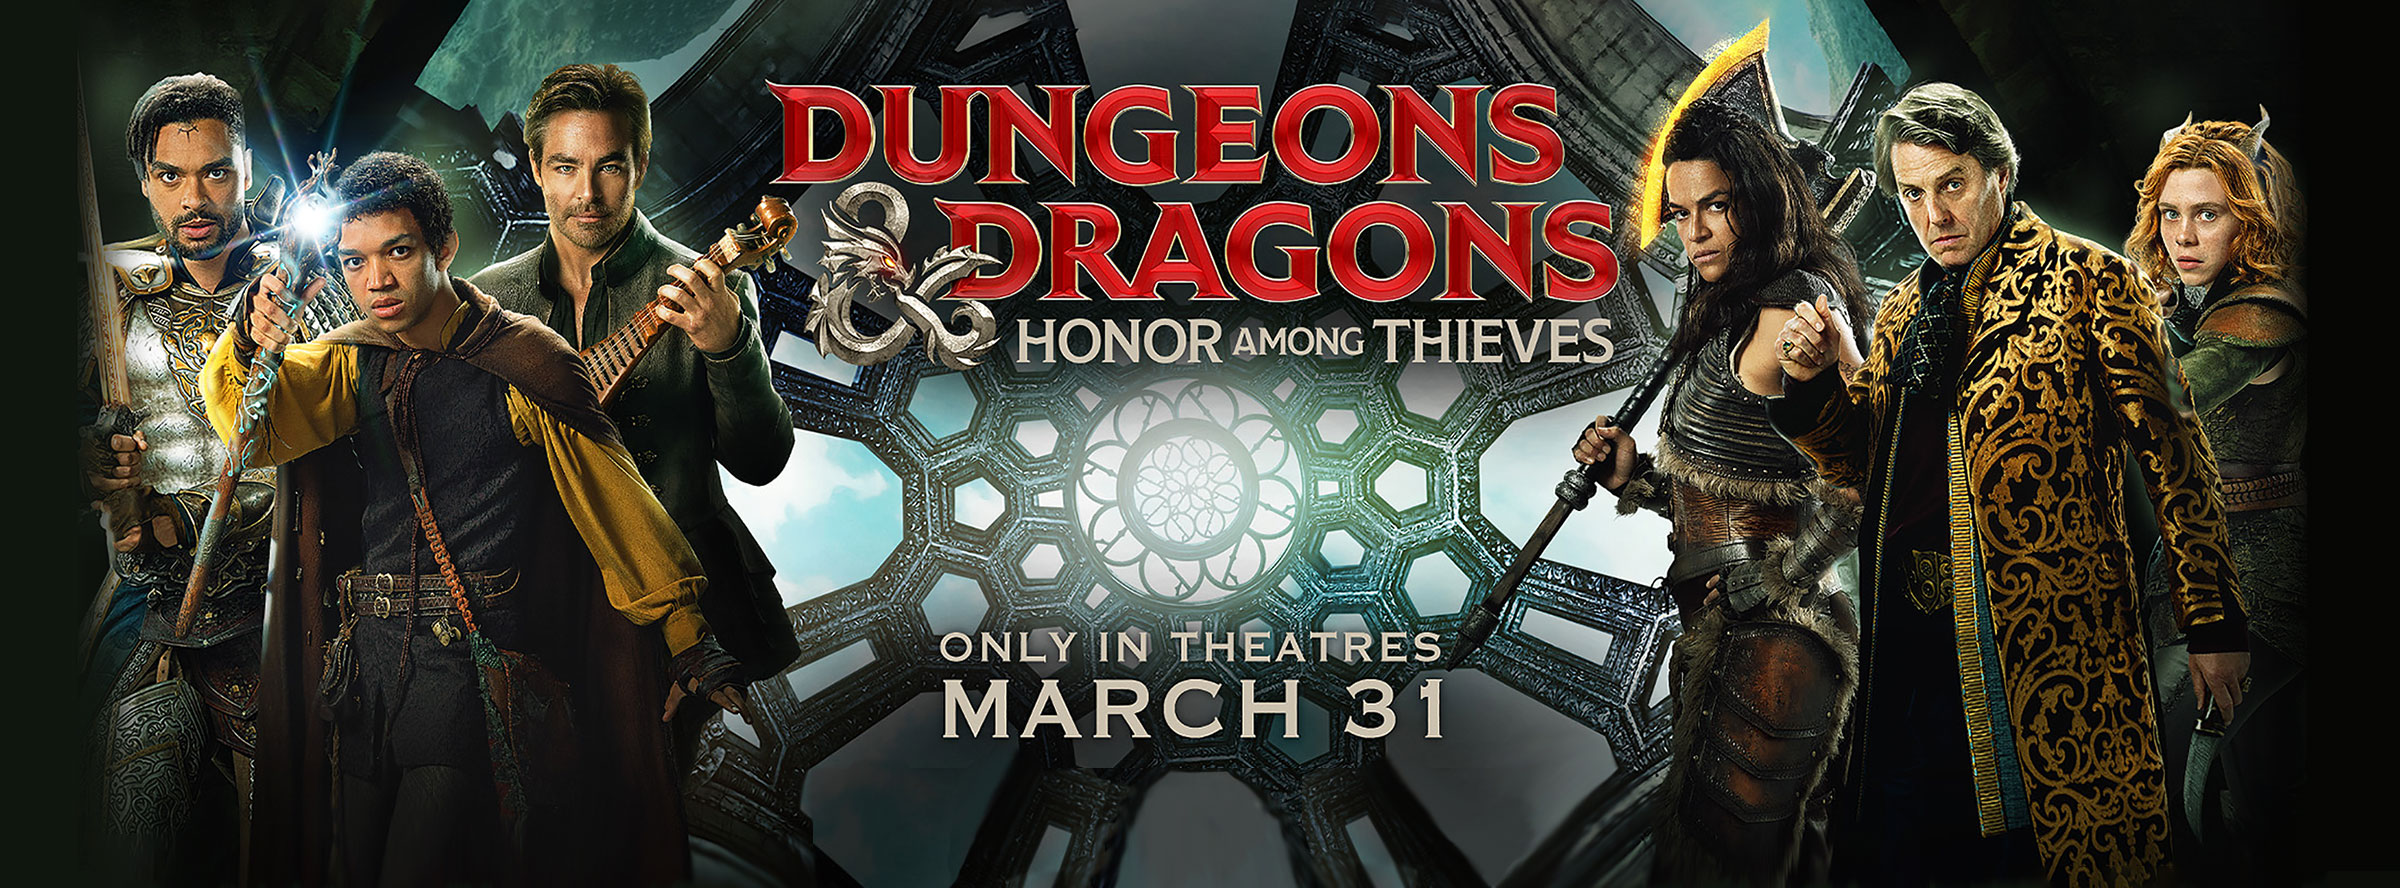 Slider Image for Dungeons & Dragons: Honor Among Thieves                                    